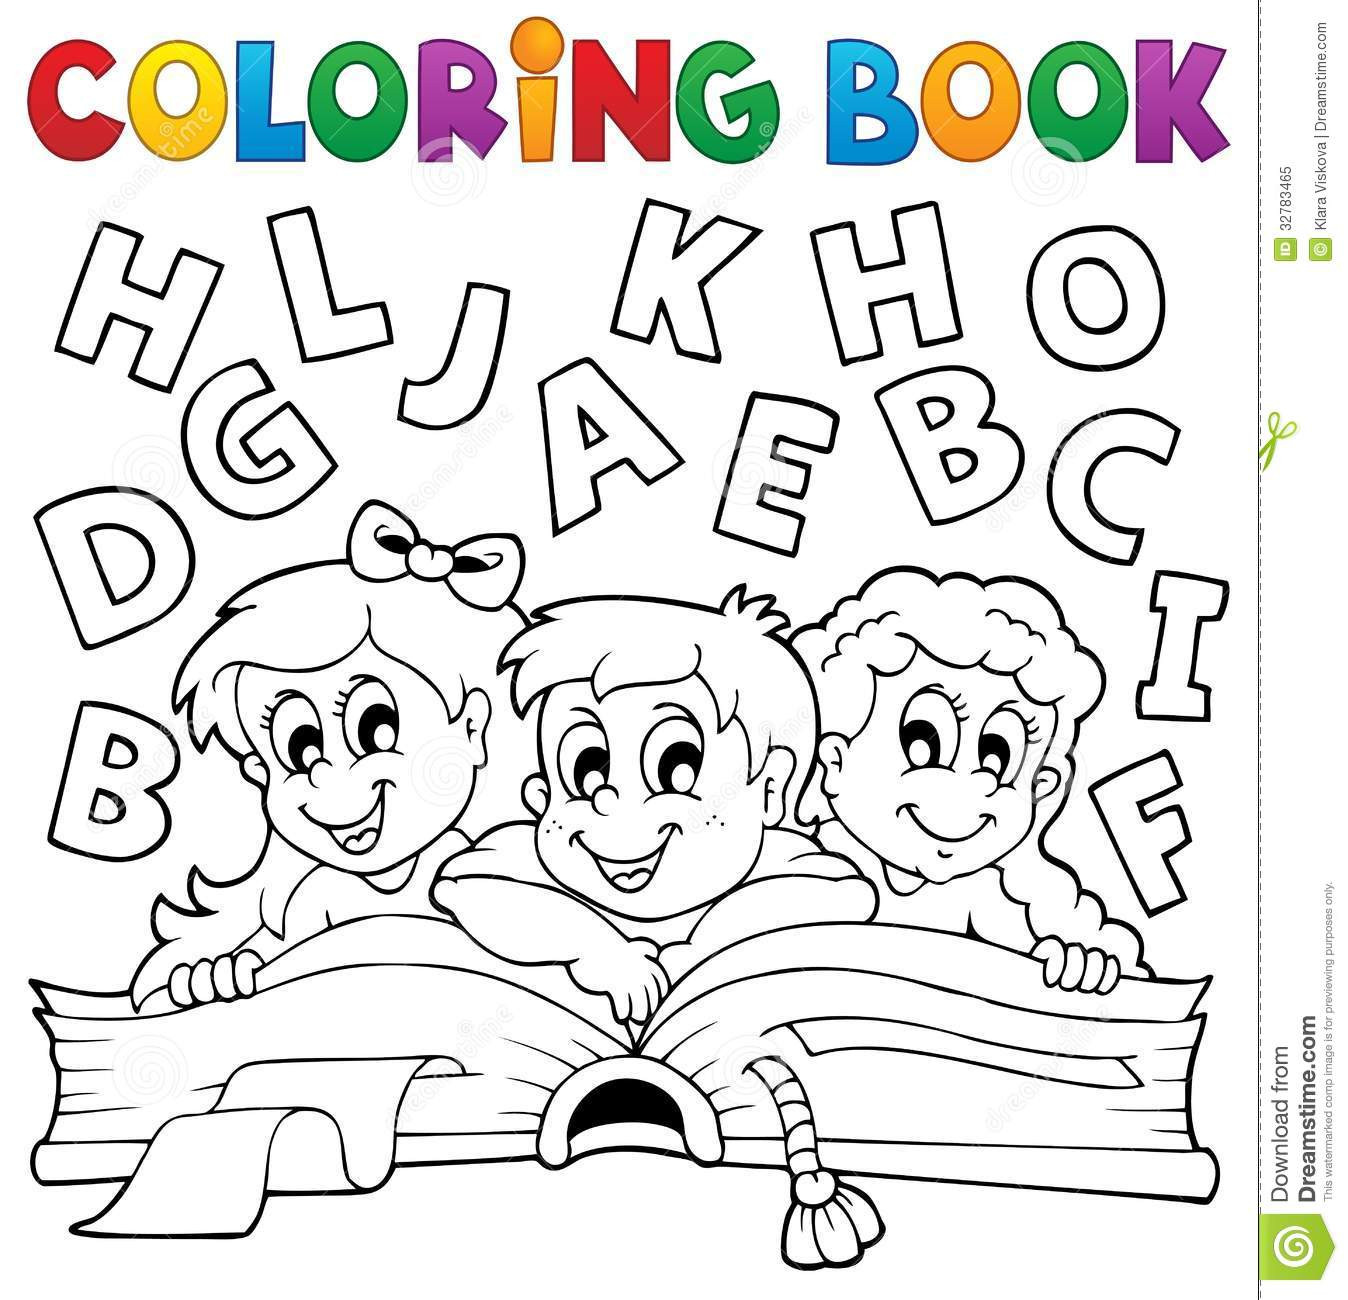 Coloring Books Kids
 Coloring book kids theme 5 stock vector Image of clipart